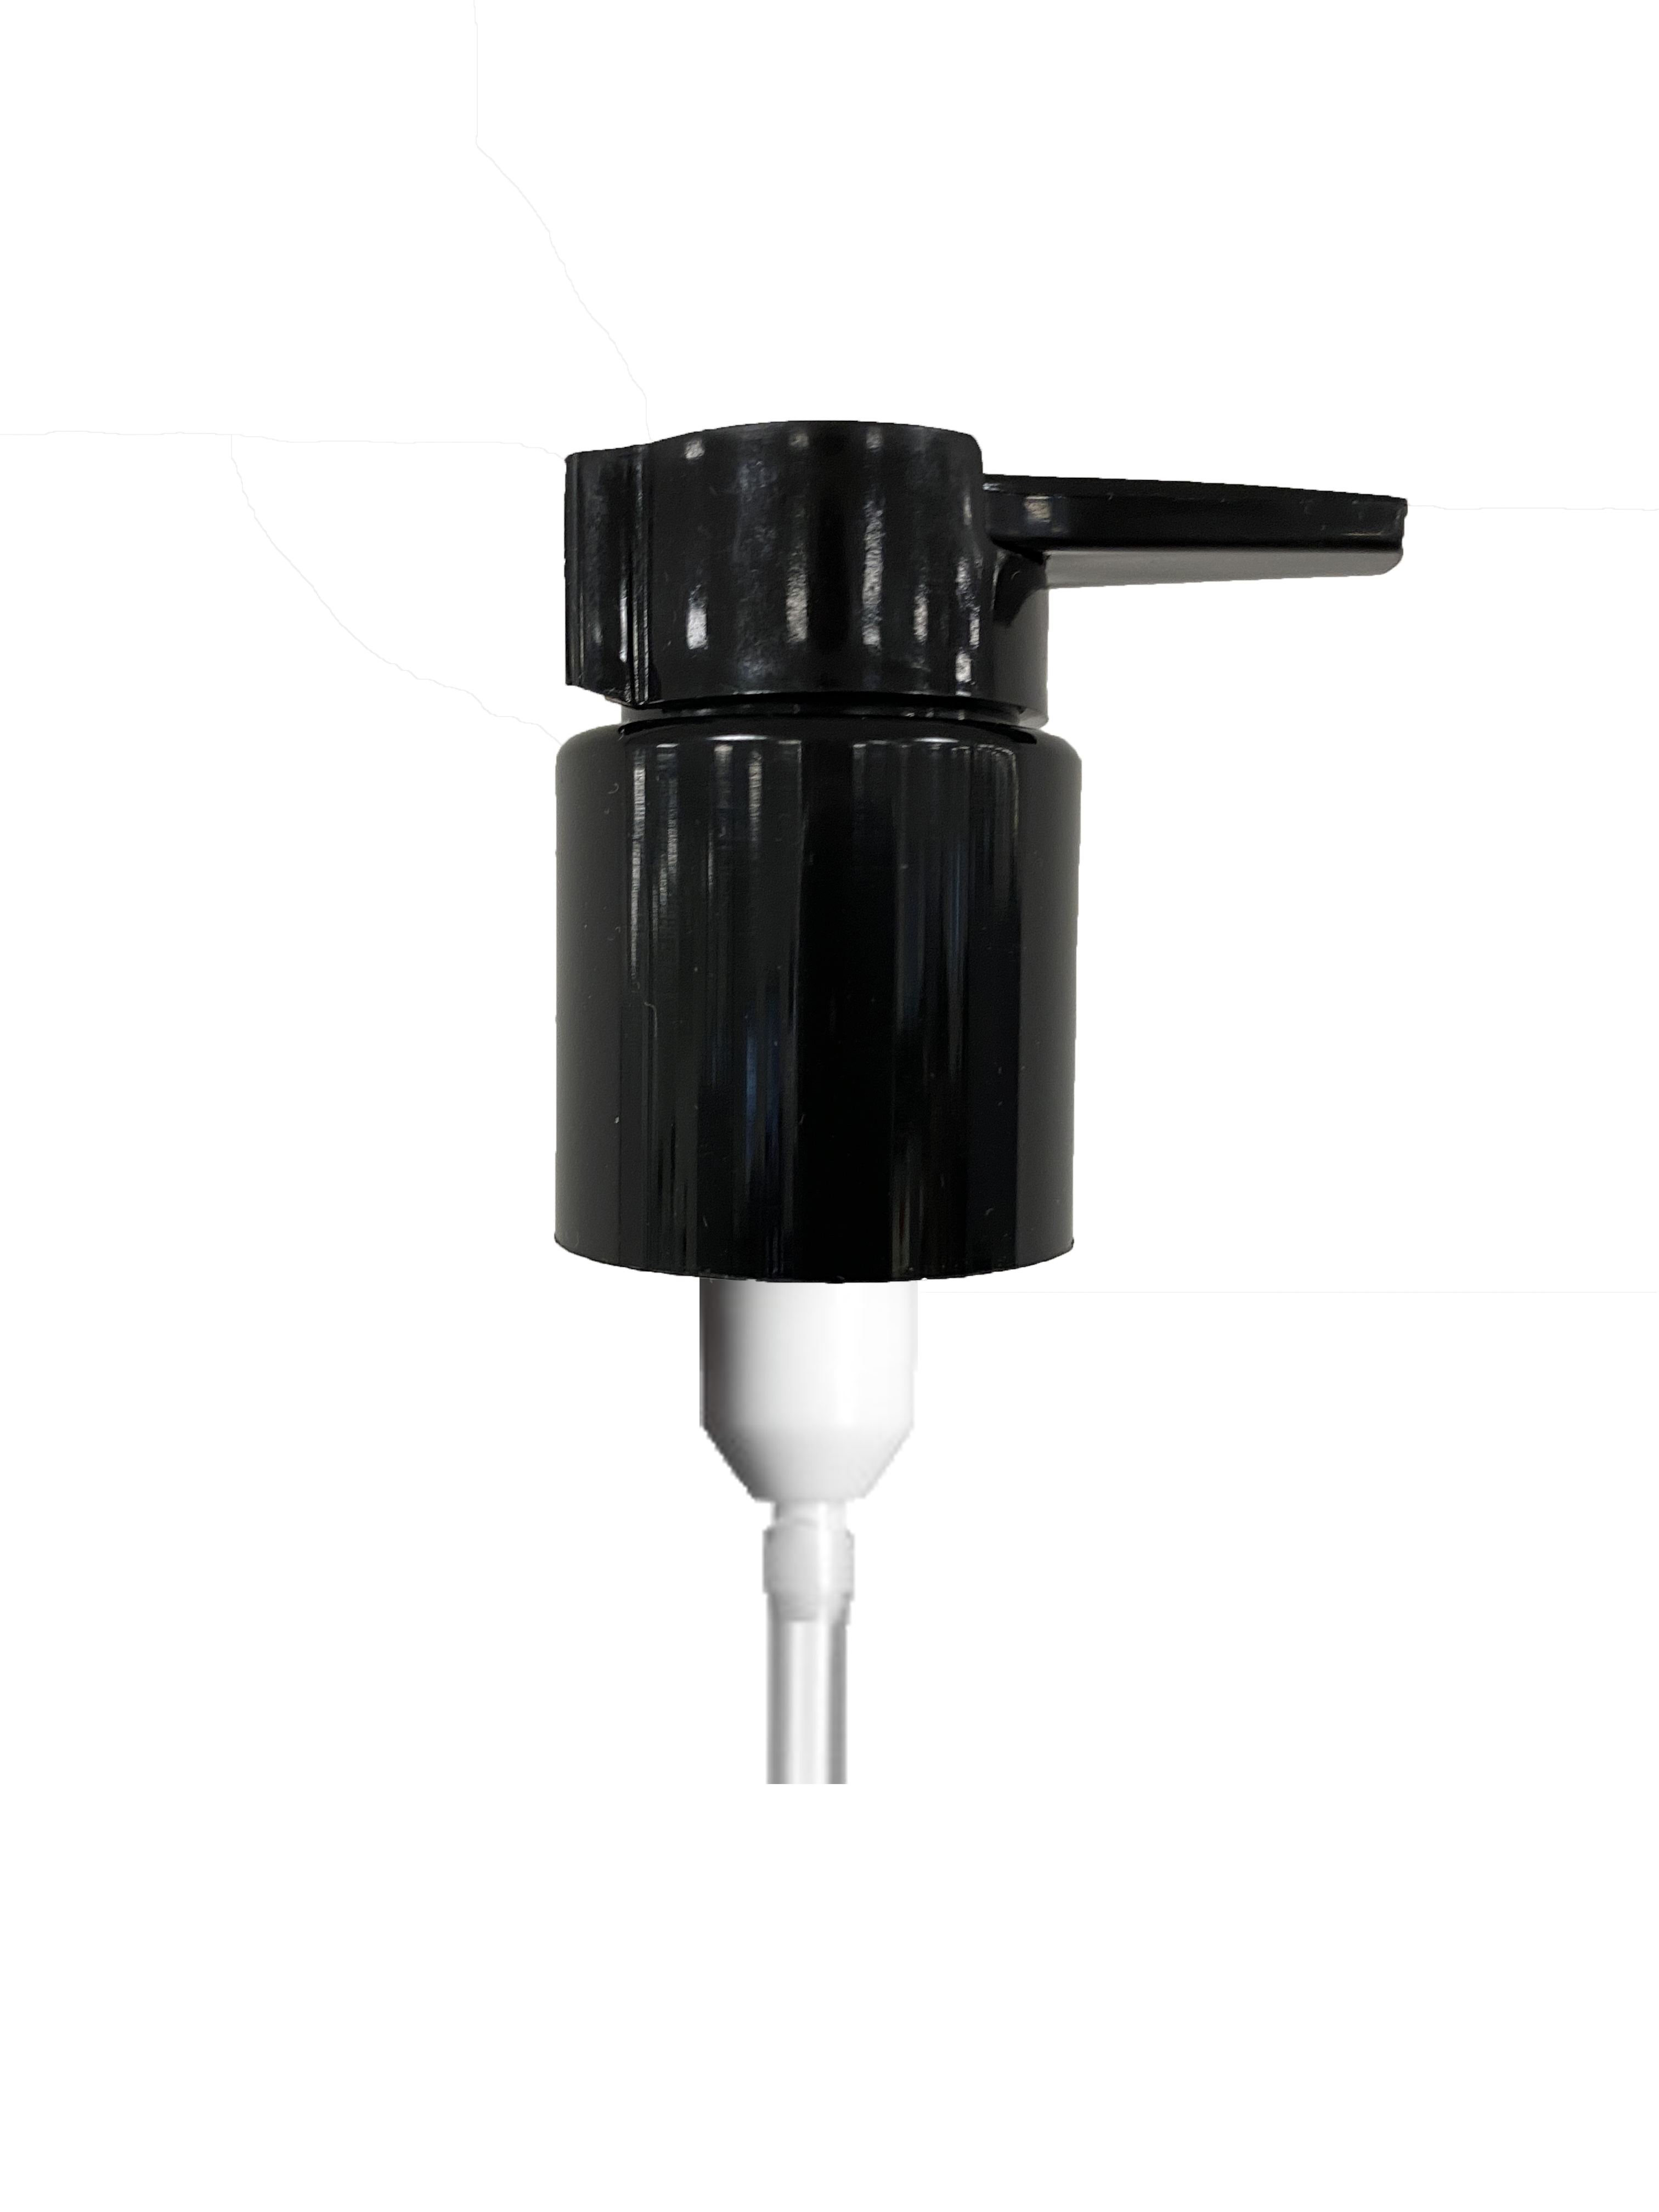 Lotion pump Extended Nozzle 24/410, PP, black, glossy finish, dose 0.50 ml, with 2.0mm tri-seal gasket, black security clip (Draco 200 ml)